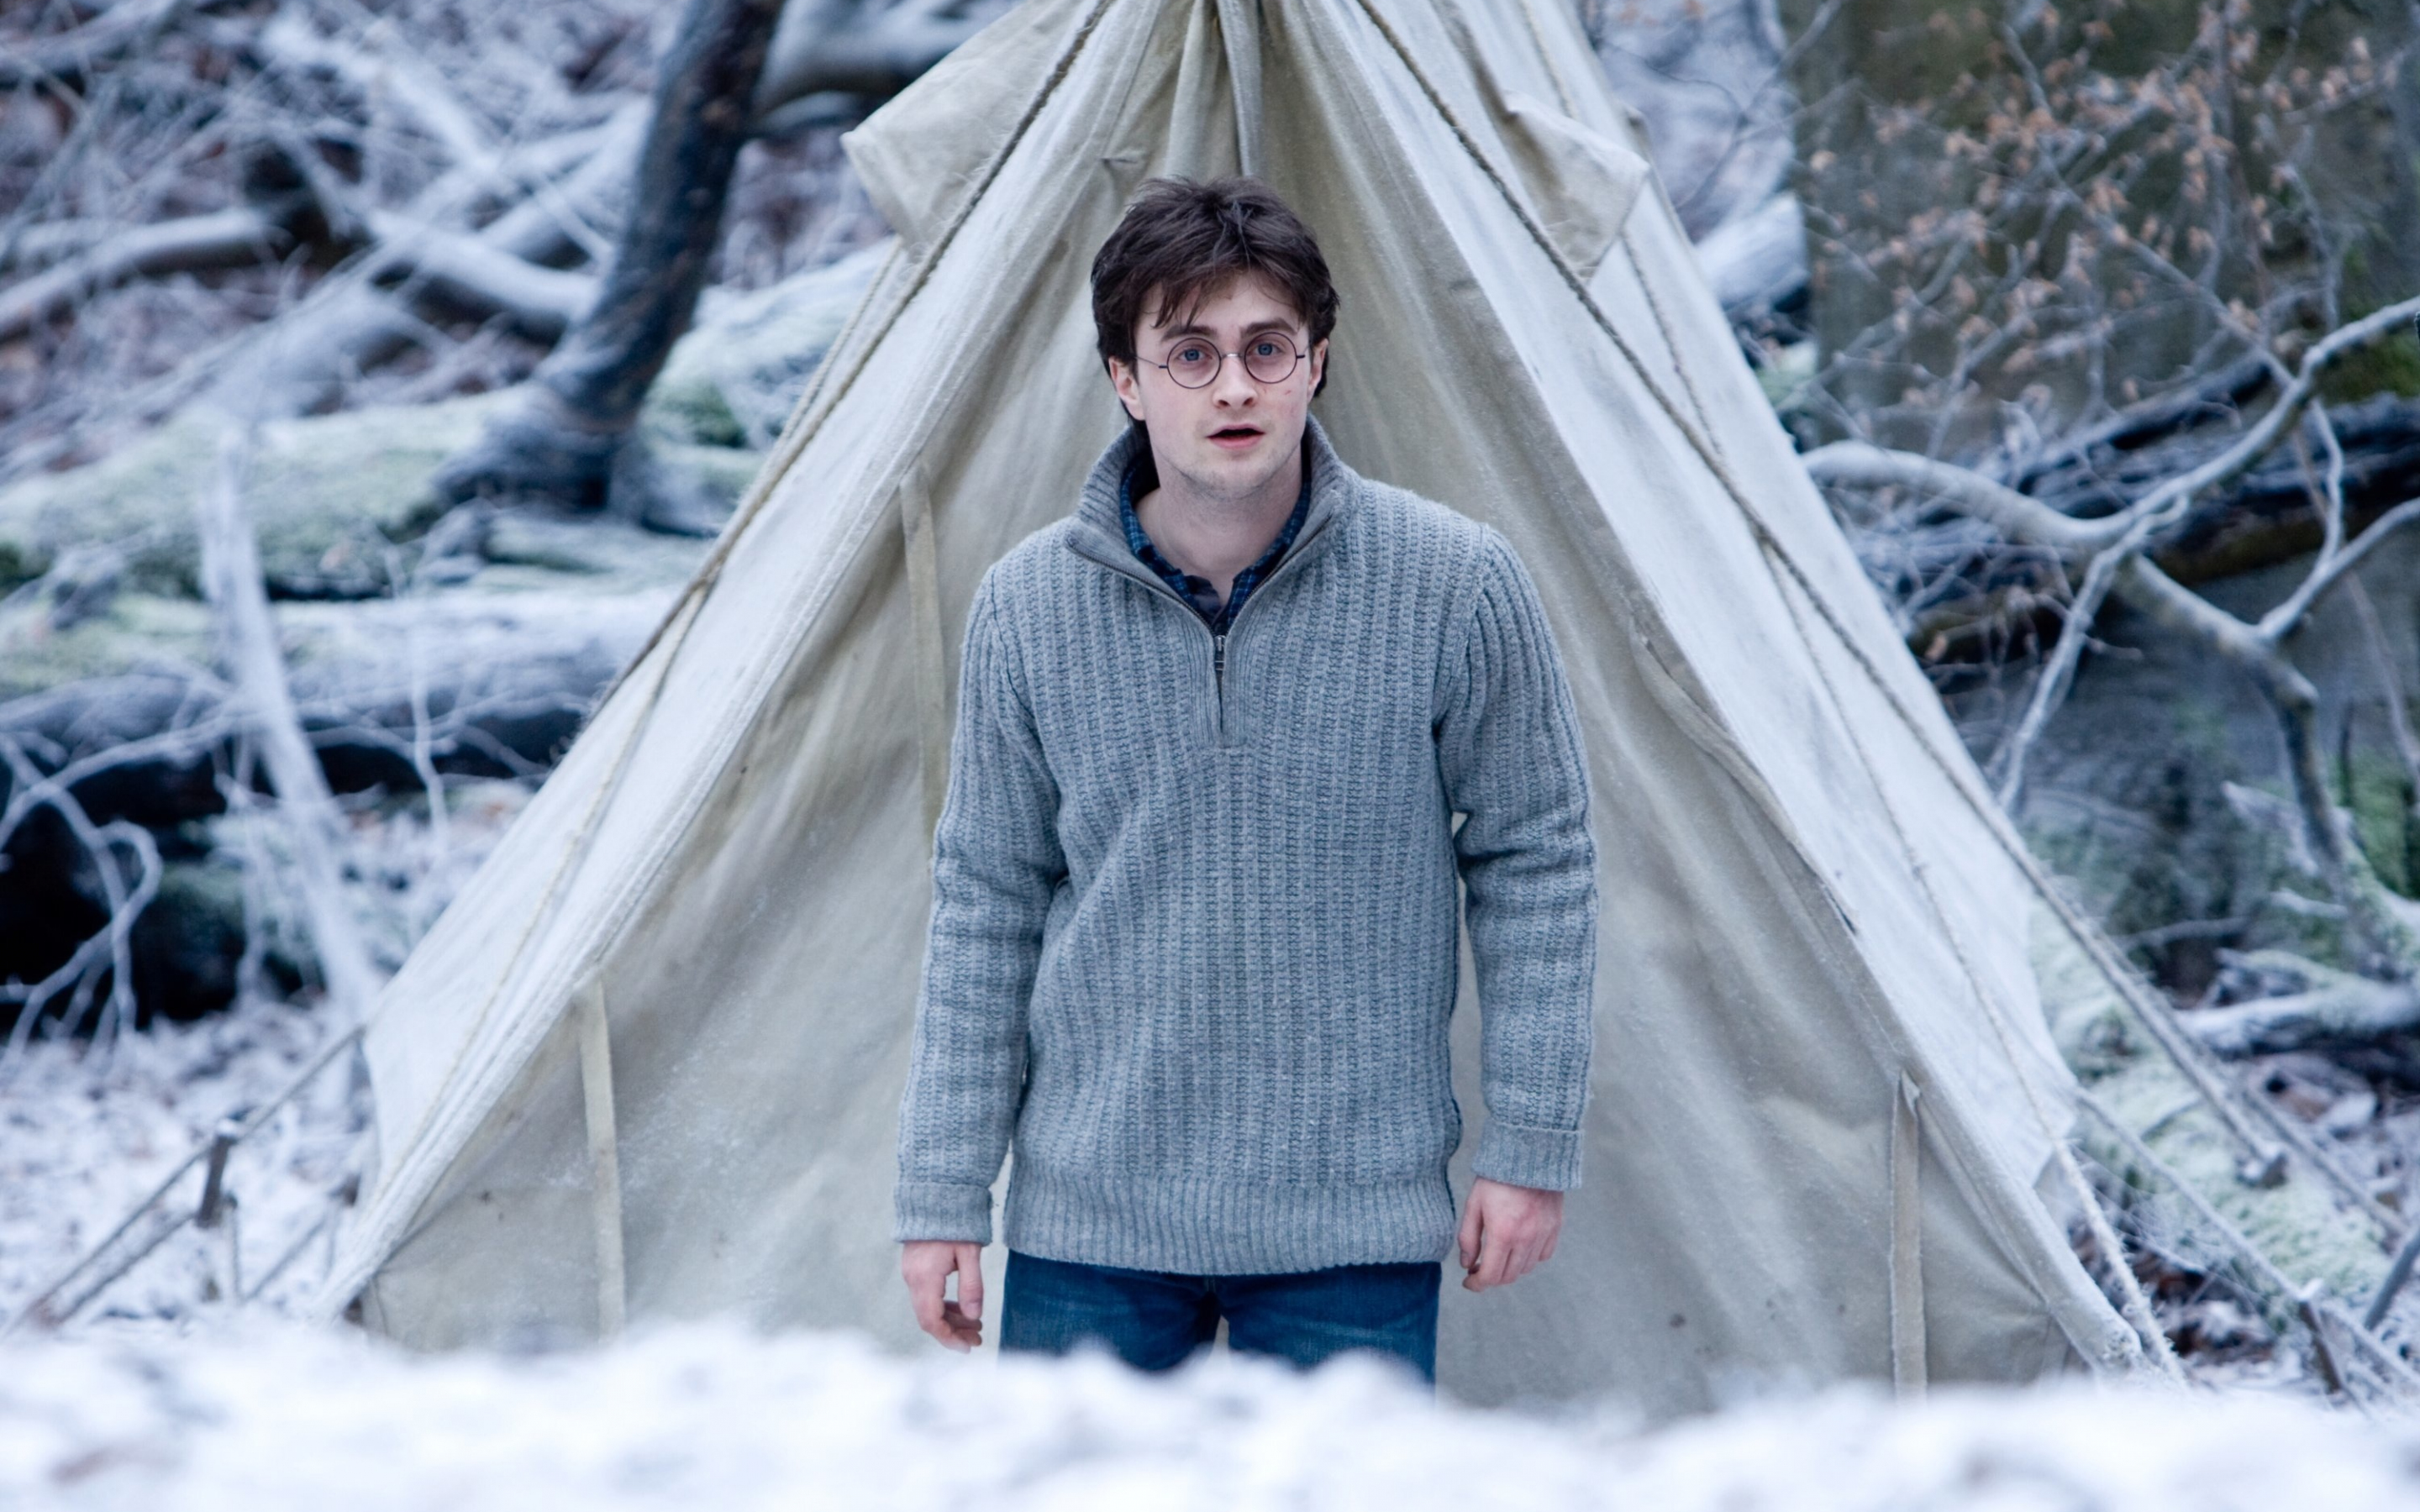 Harry Potter and the Deathly Hallows – Part 1, movie, Daniel Radcliffe, 2880x1800 wallpaper